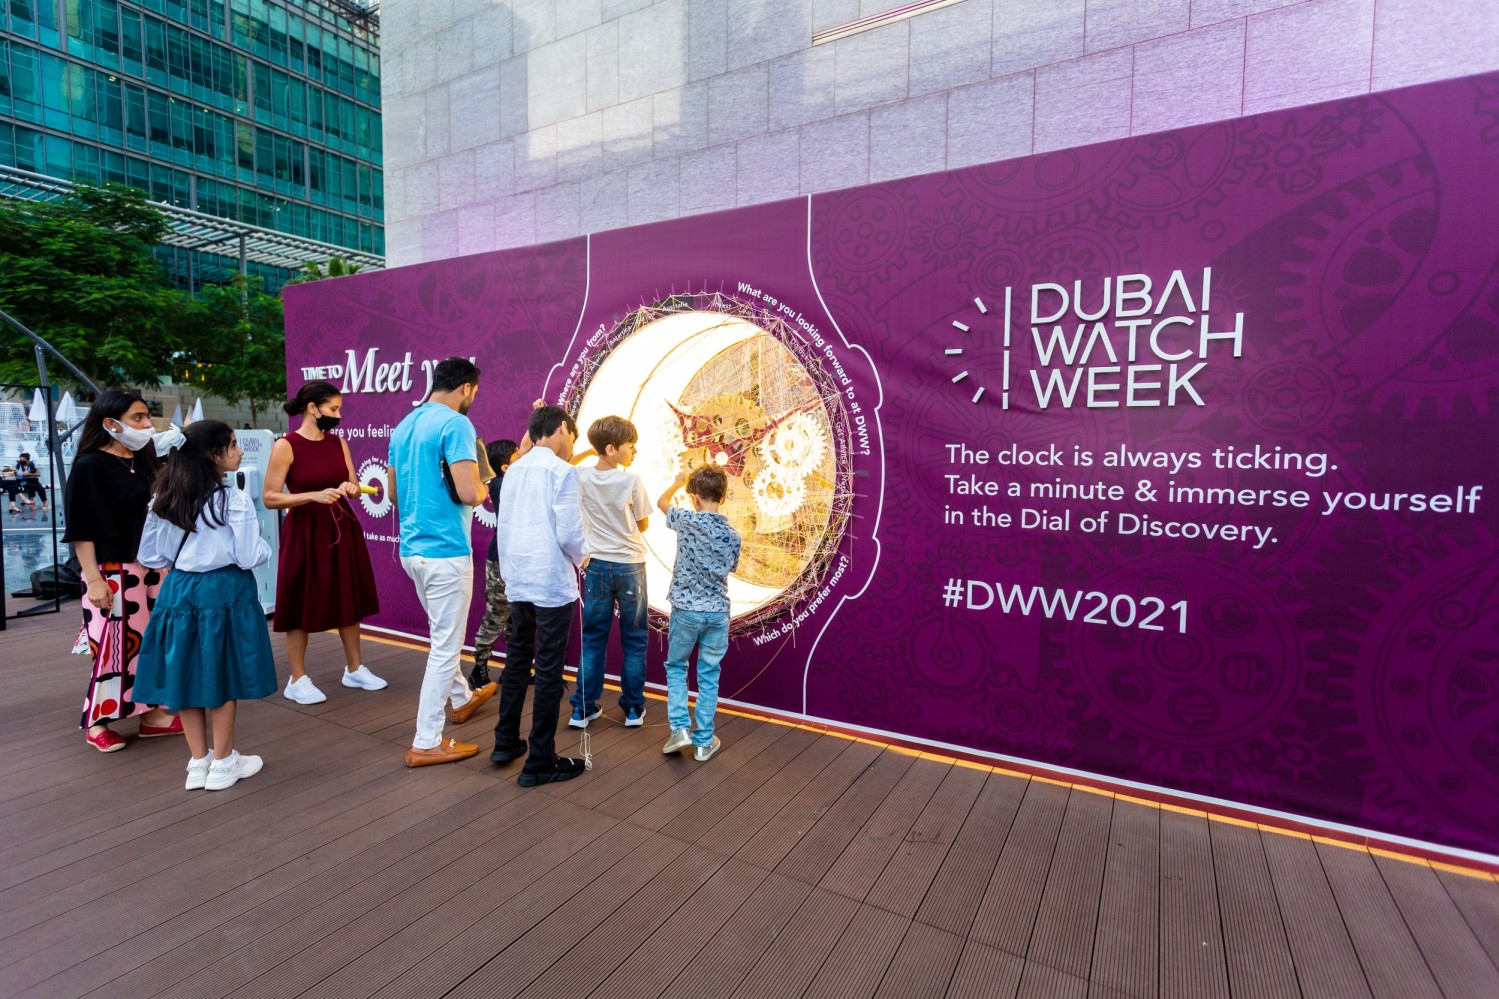 Fun for all the family at Dubai Watch Week